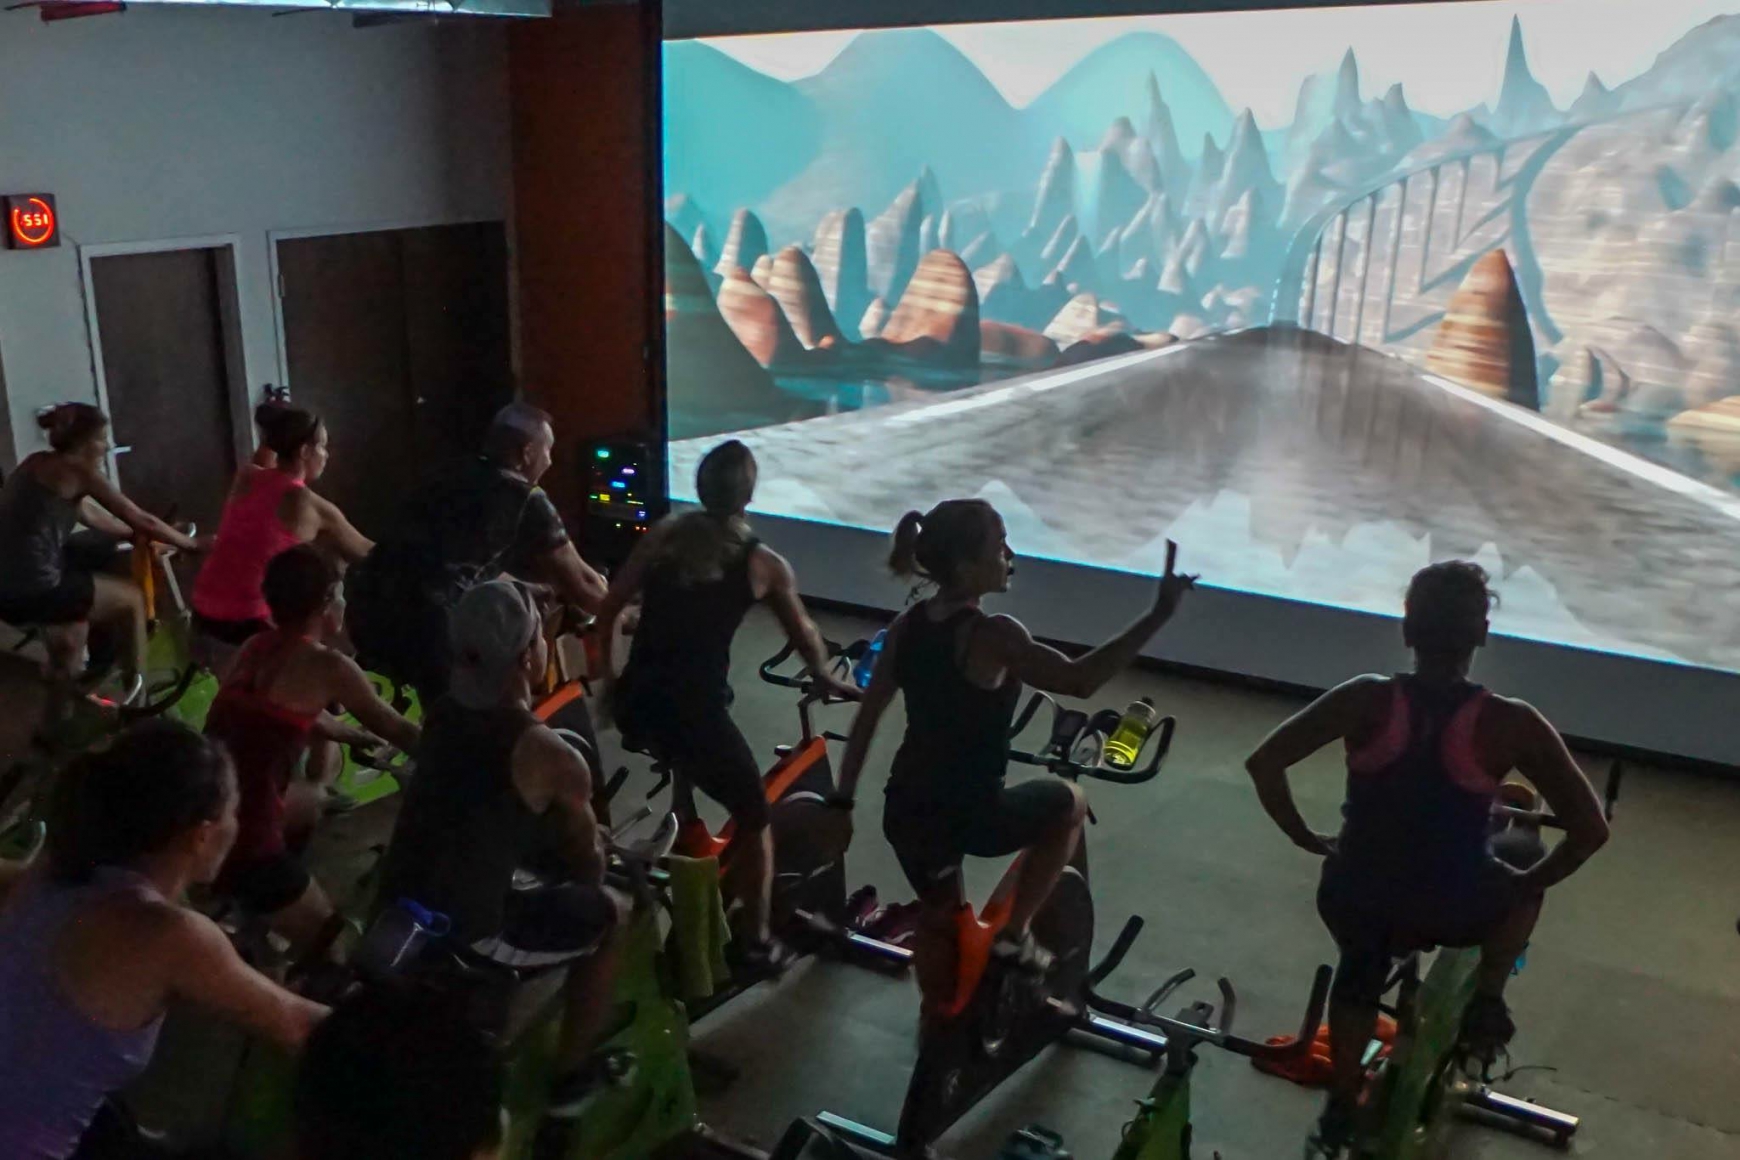 Indoor Cycling Studio Uses Theatre Size Animation To Make The within Amazing and also Gorgeous cycling studio regarding  Property